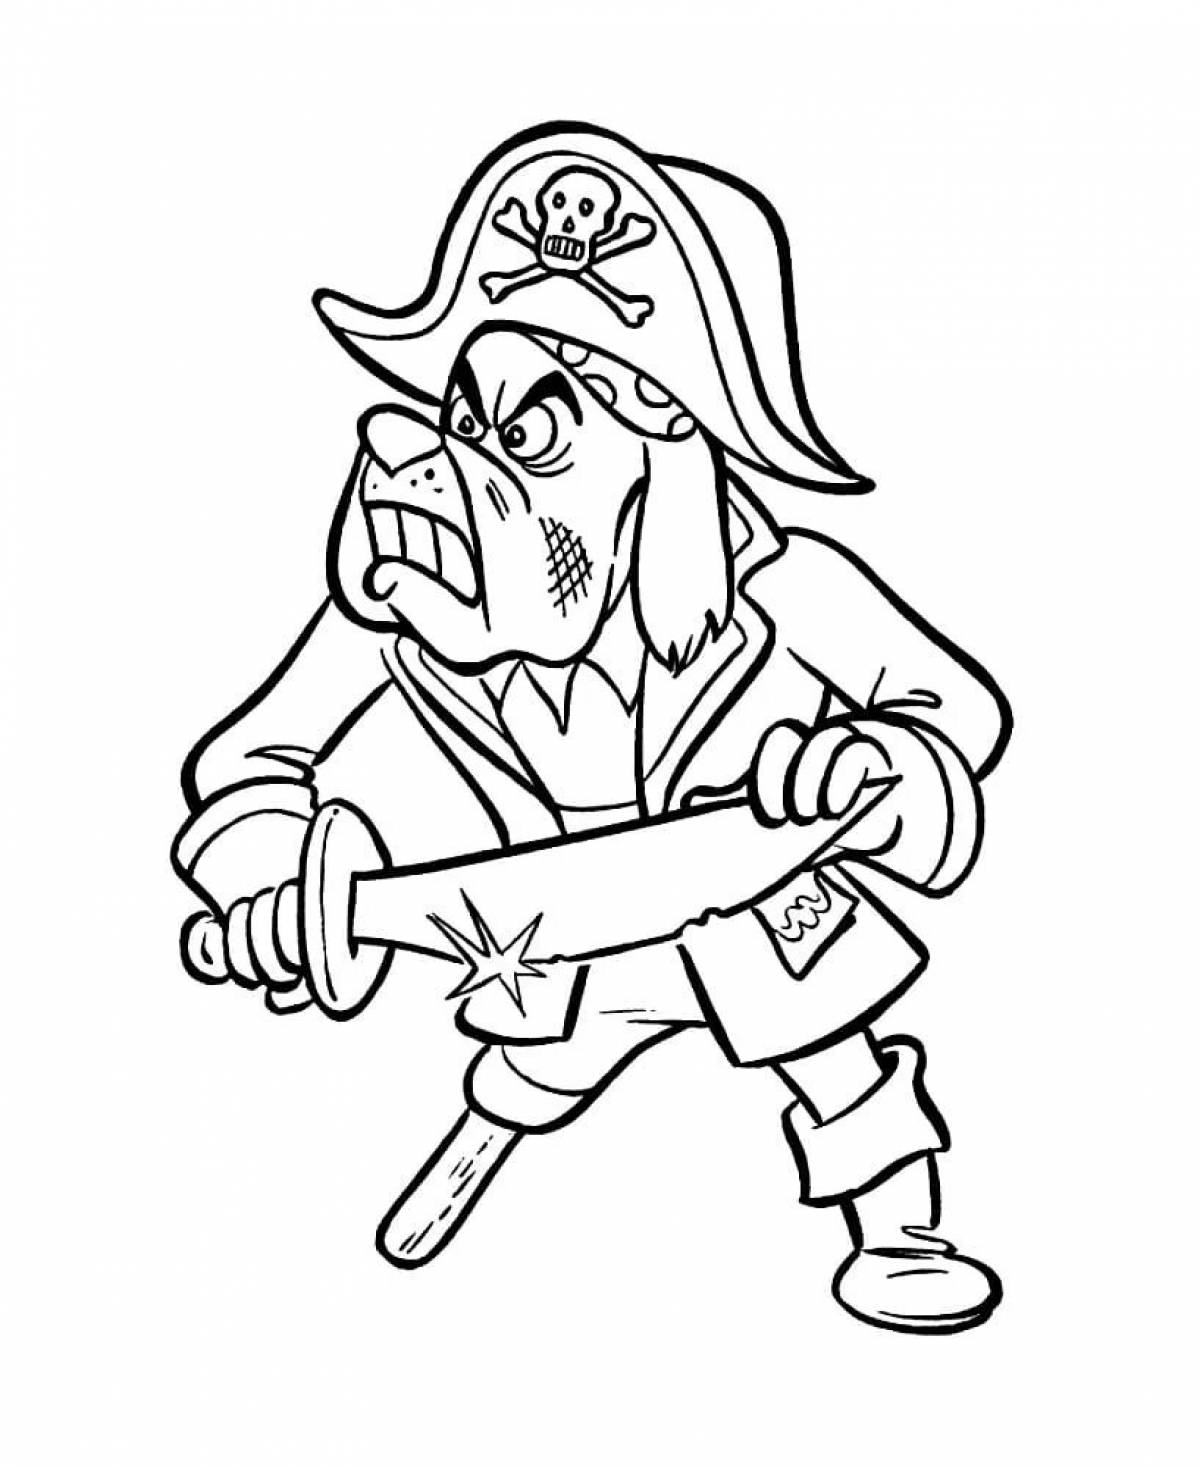 Coloring page animated robbers